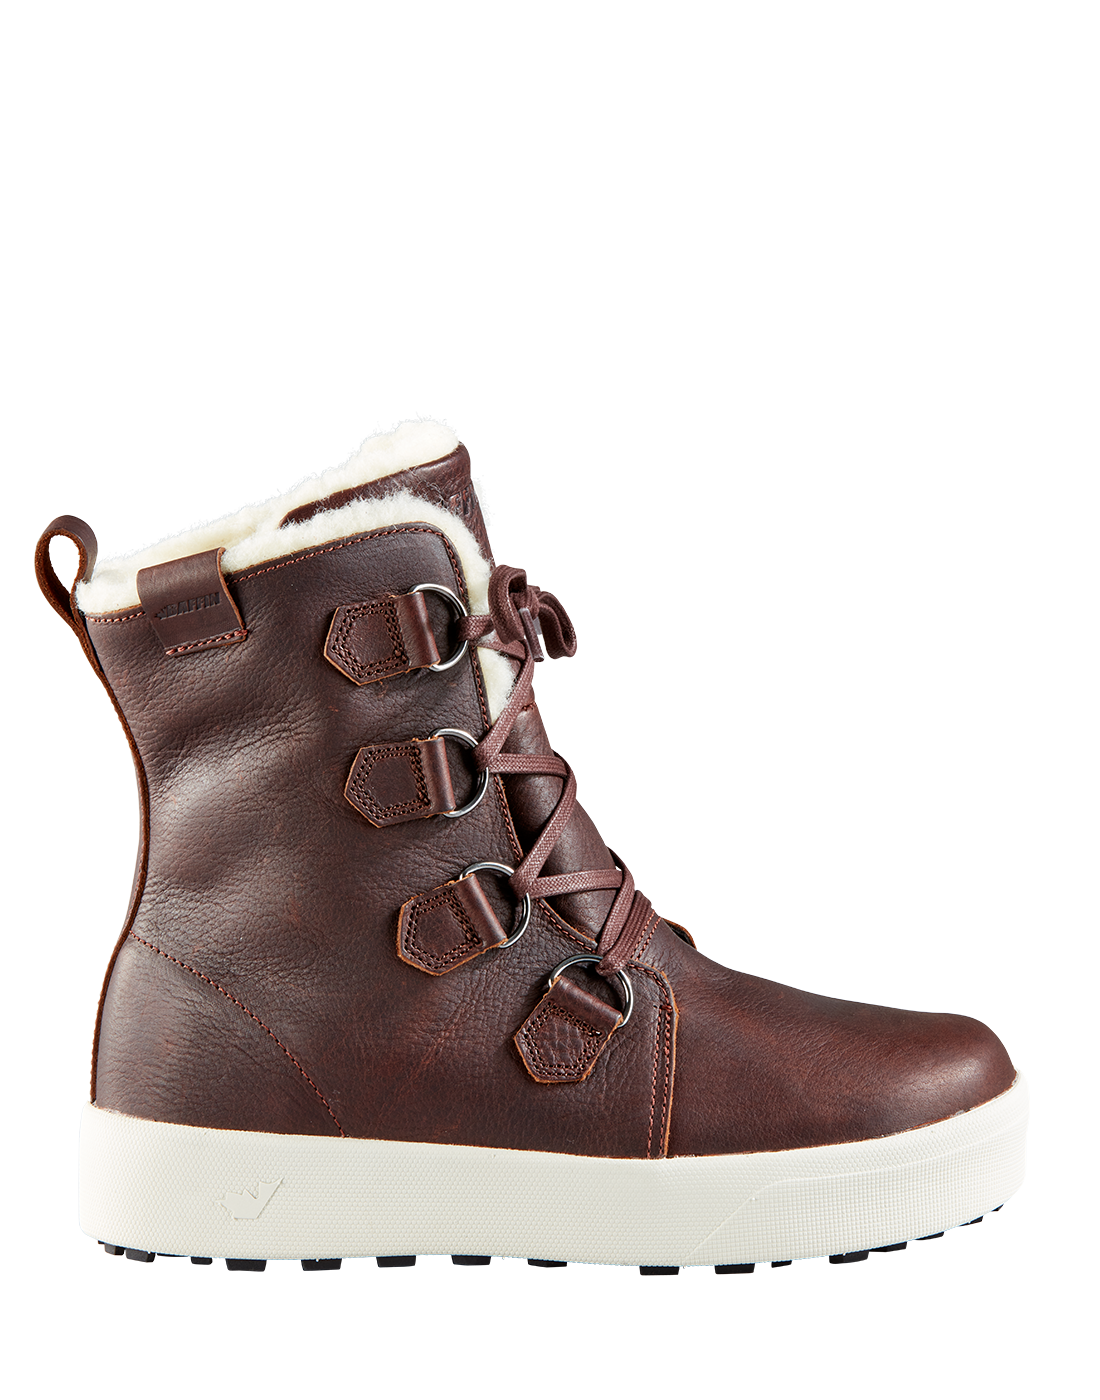 'Baffin' Women's High Park Insulated WP Boot - Brown